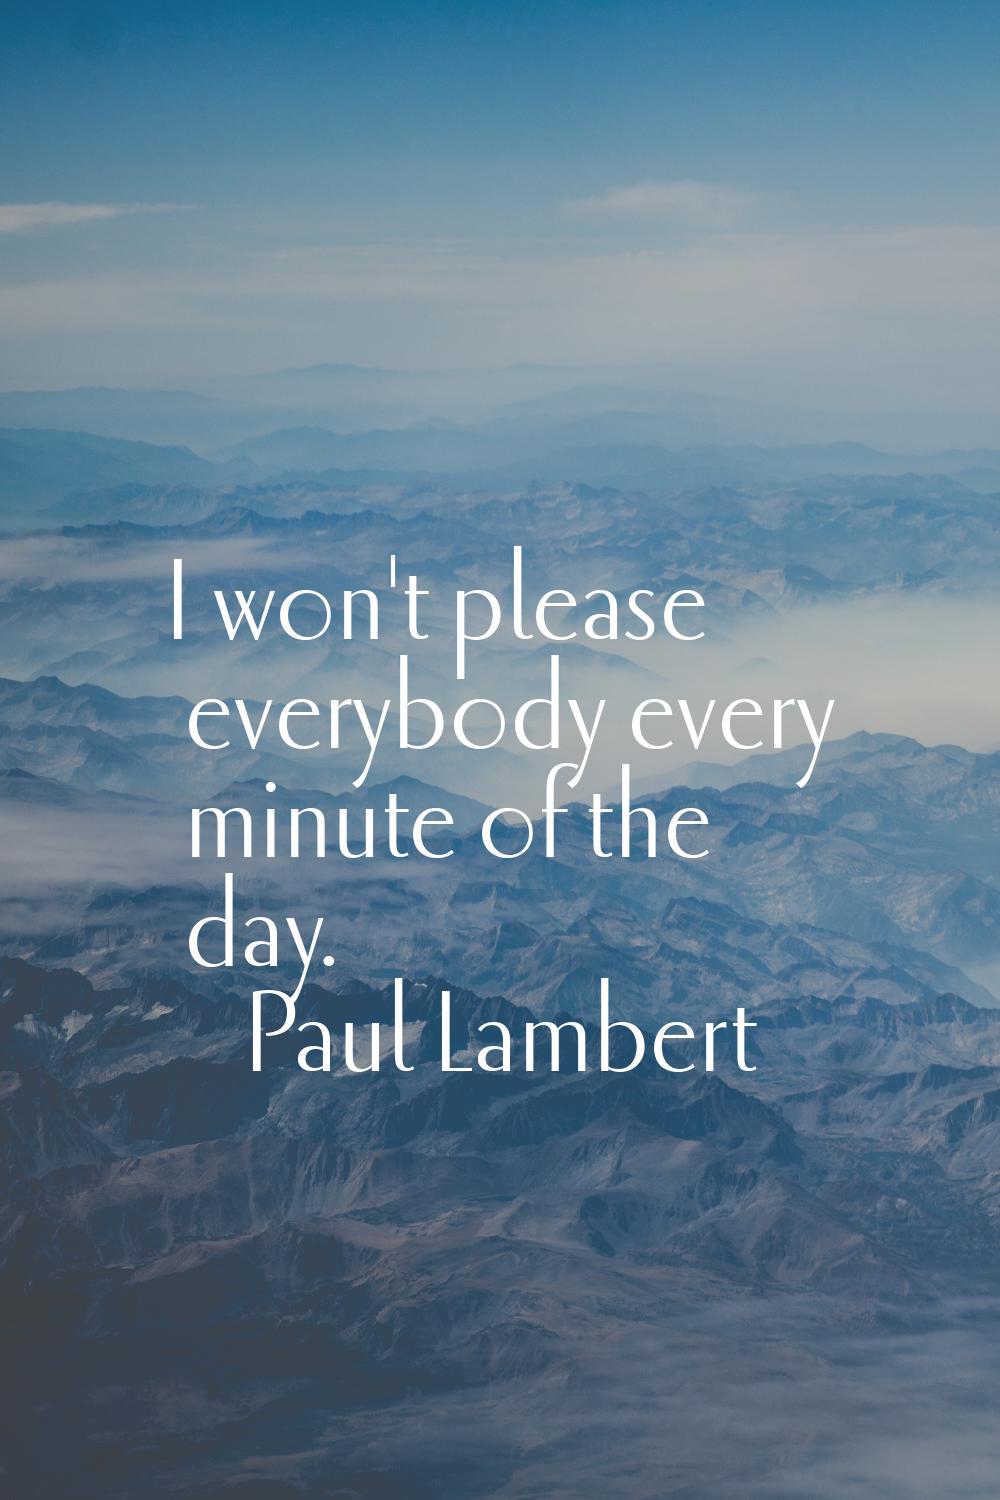 I won't please everybody every minute of the day.